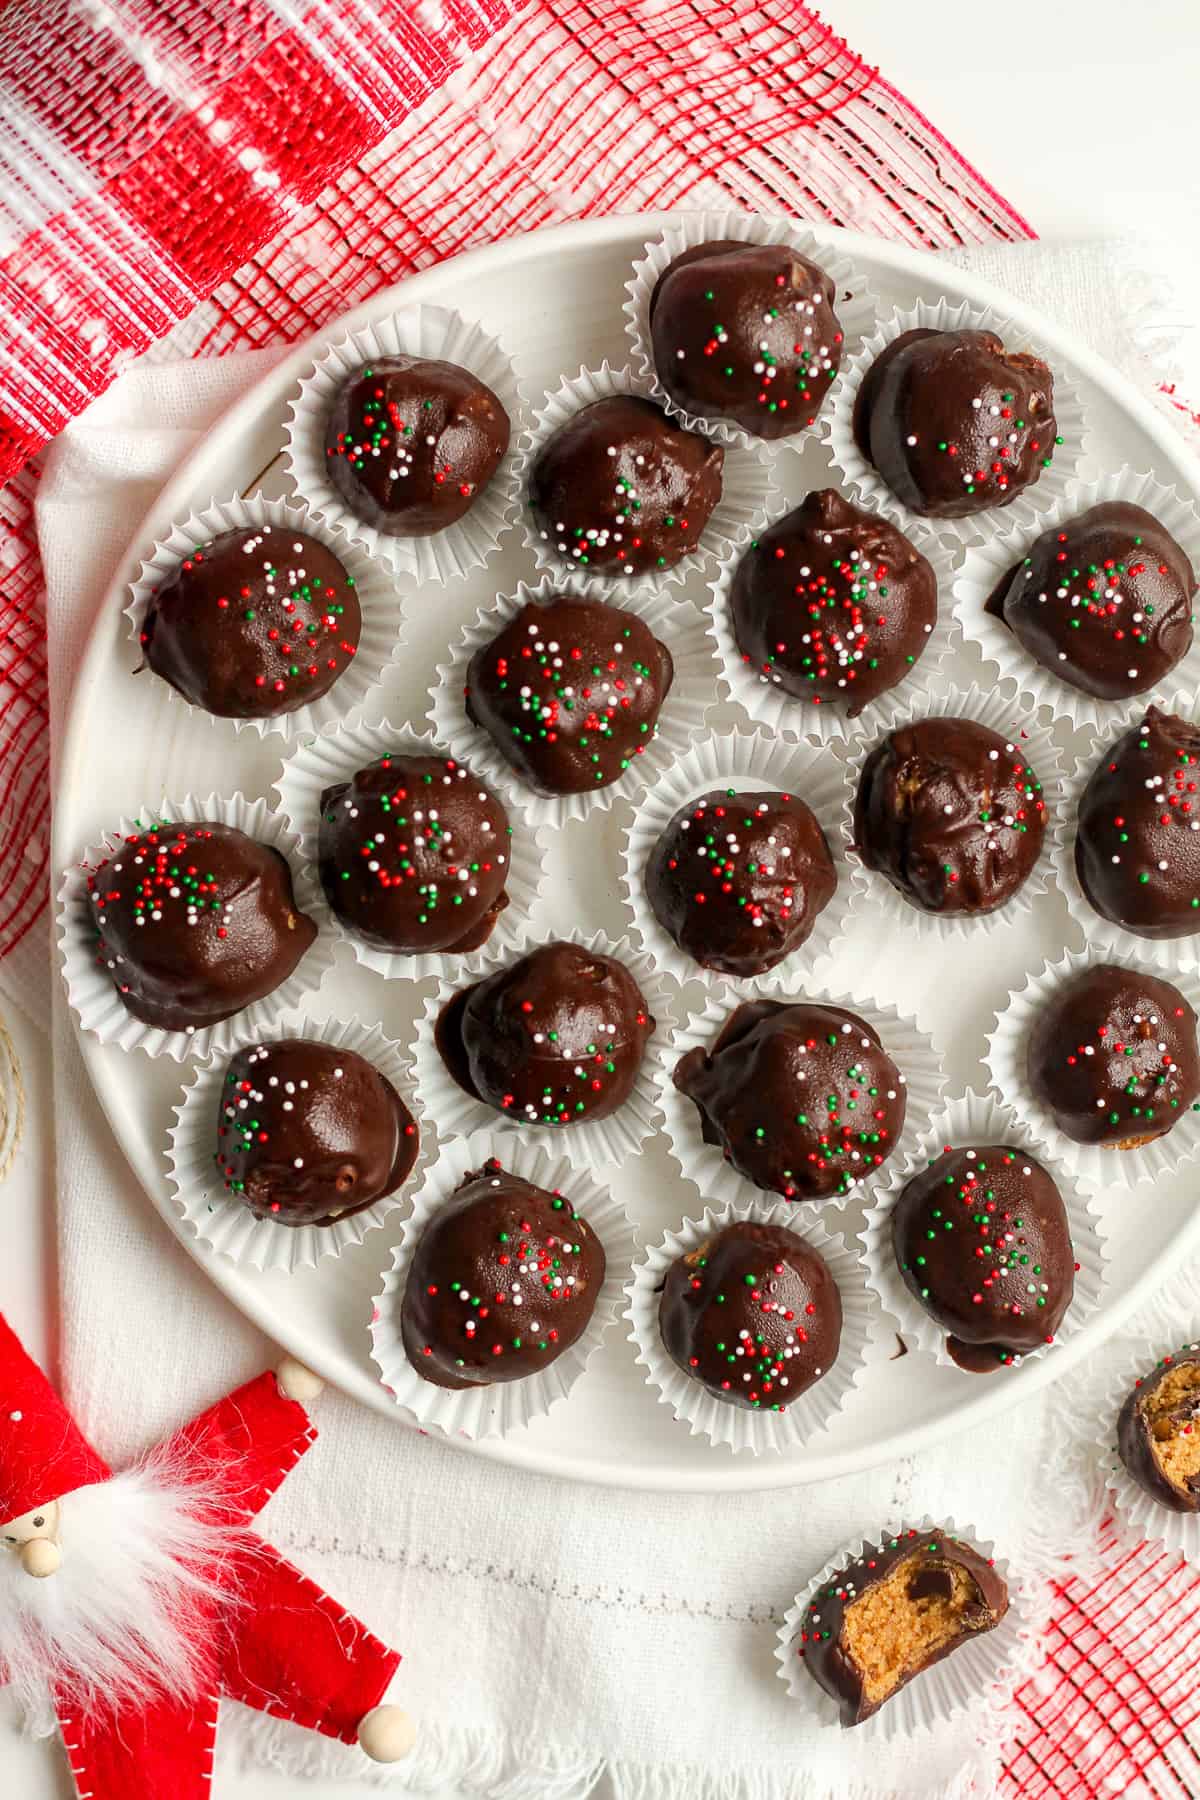 A plate of no bake peanut butter balls with sprinkles.